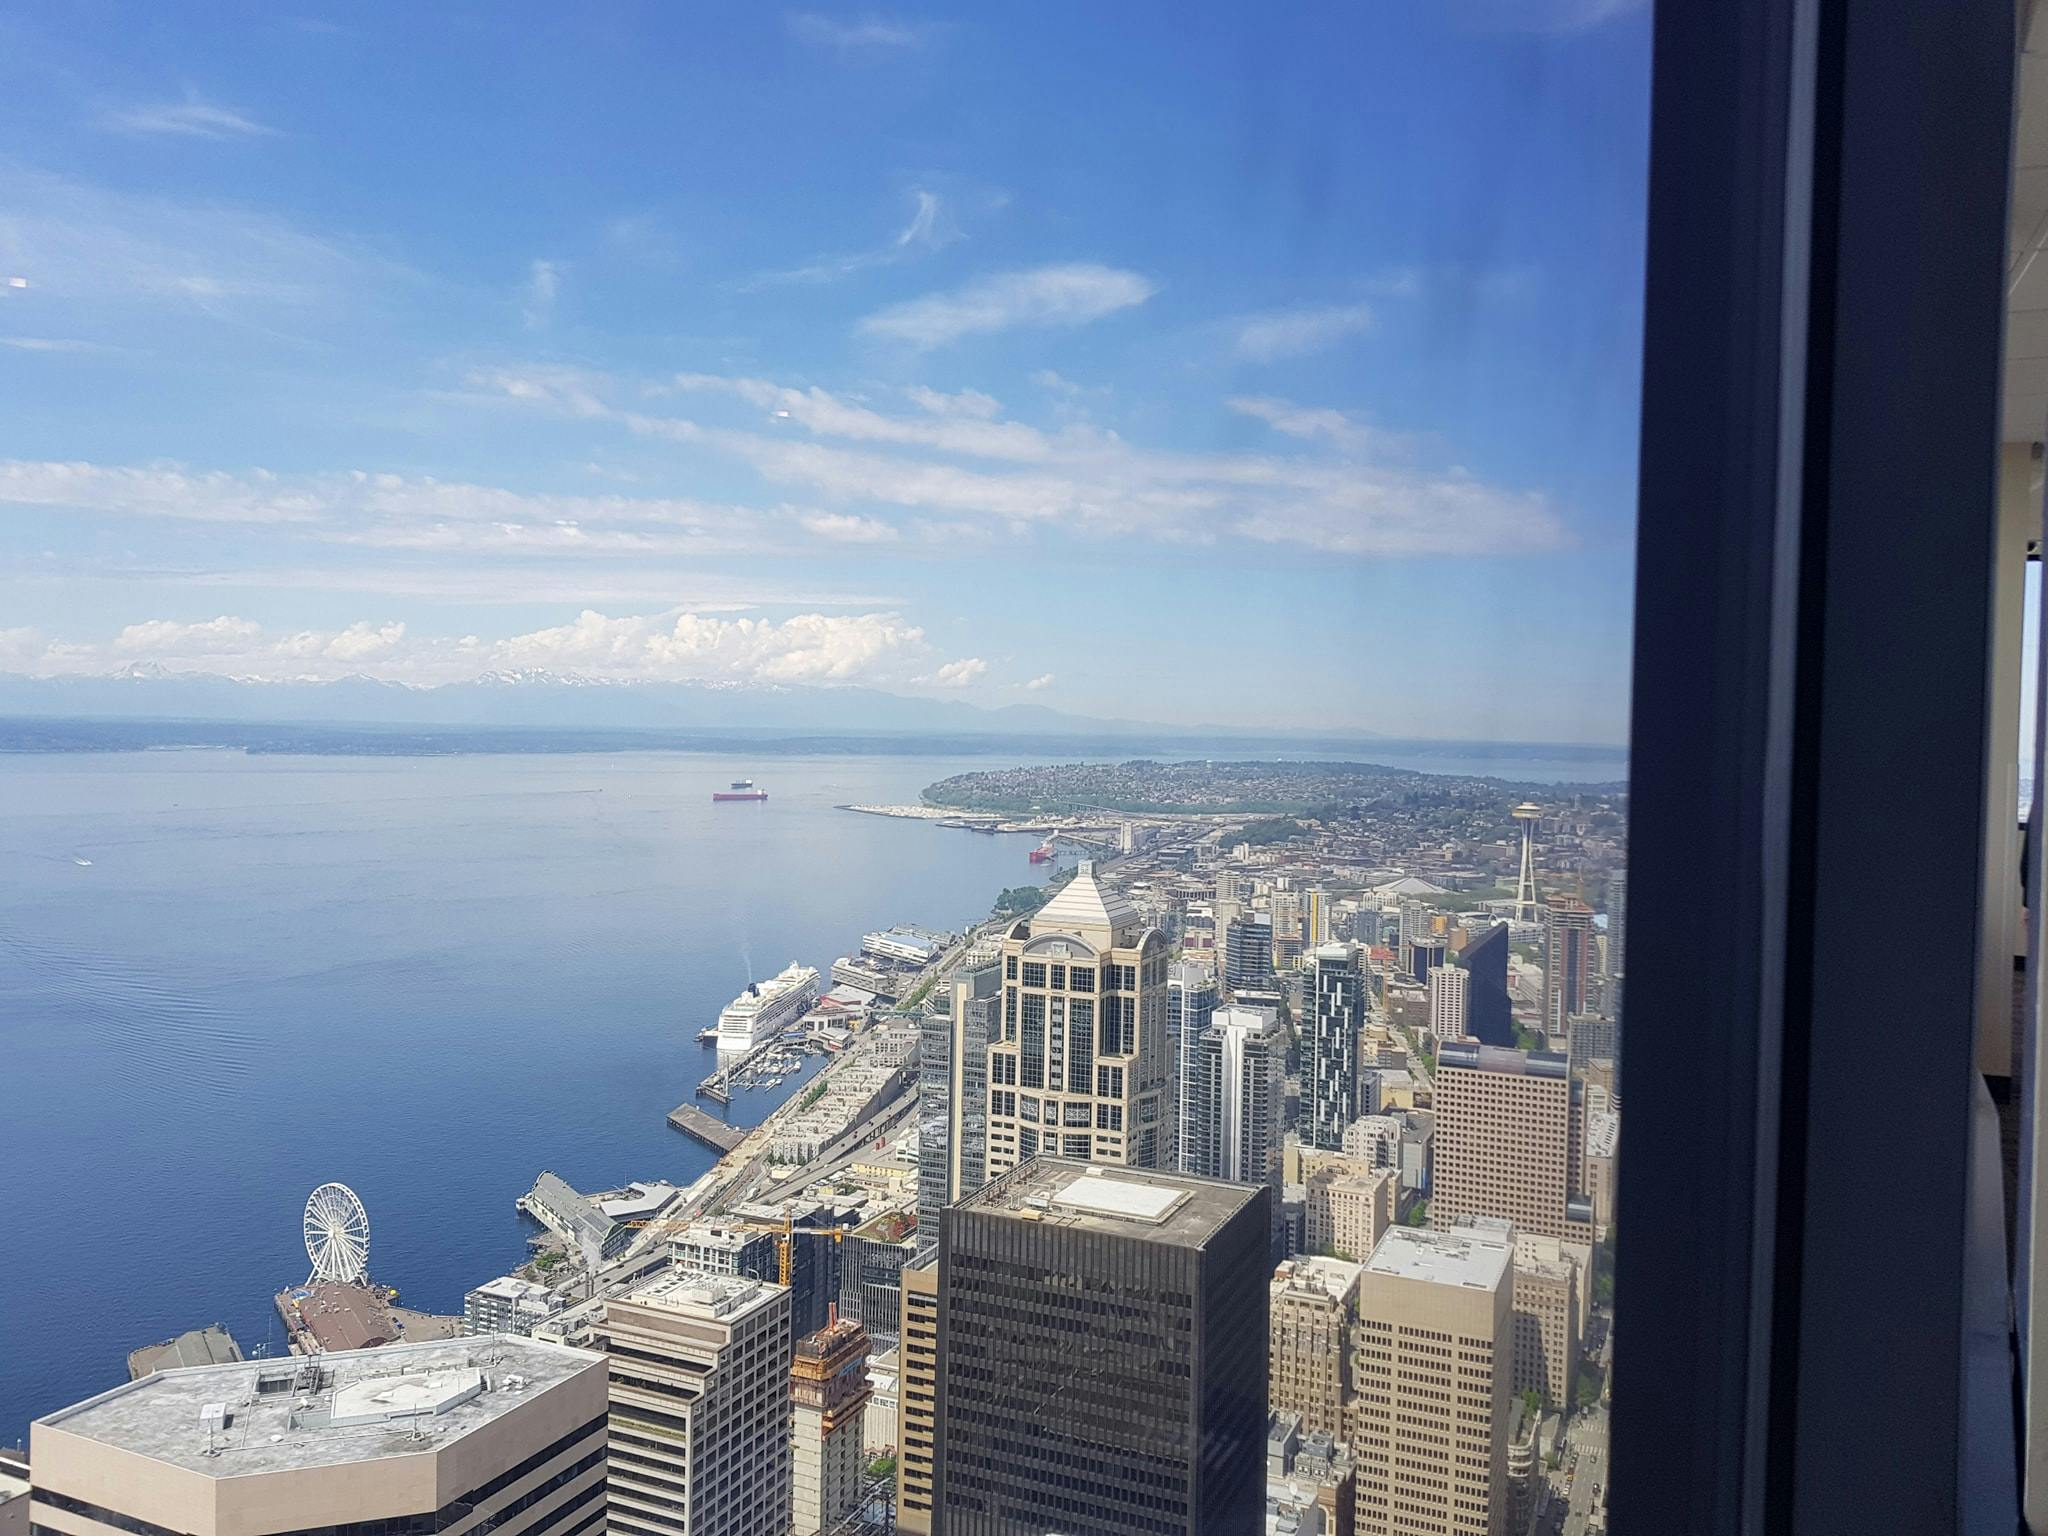 View from the Columbia Center in downtown Seattle overlooking the Space Needle